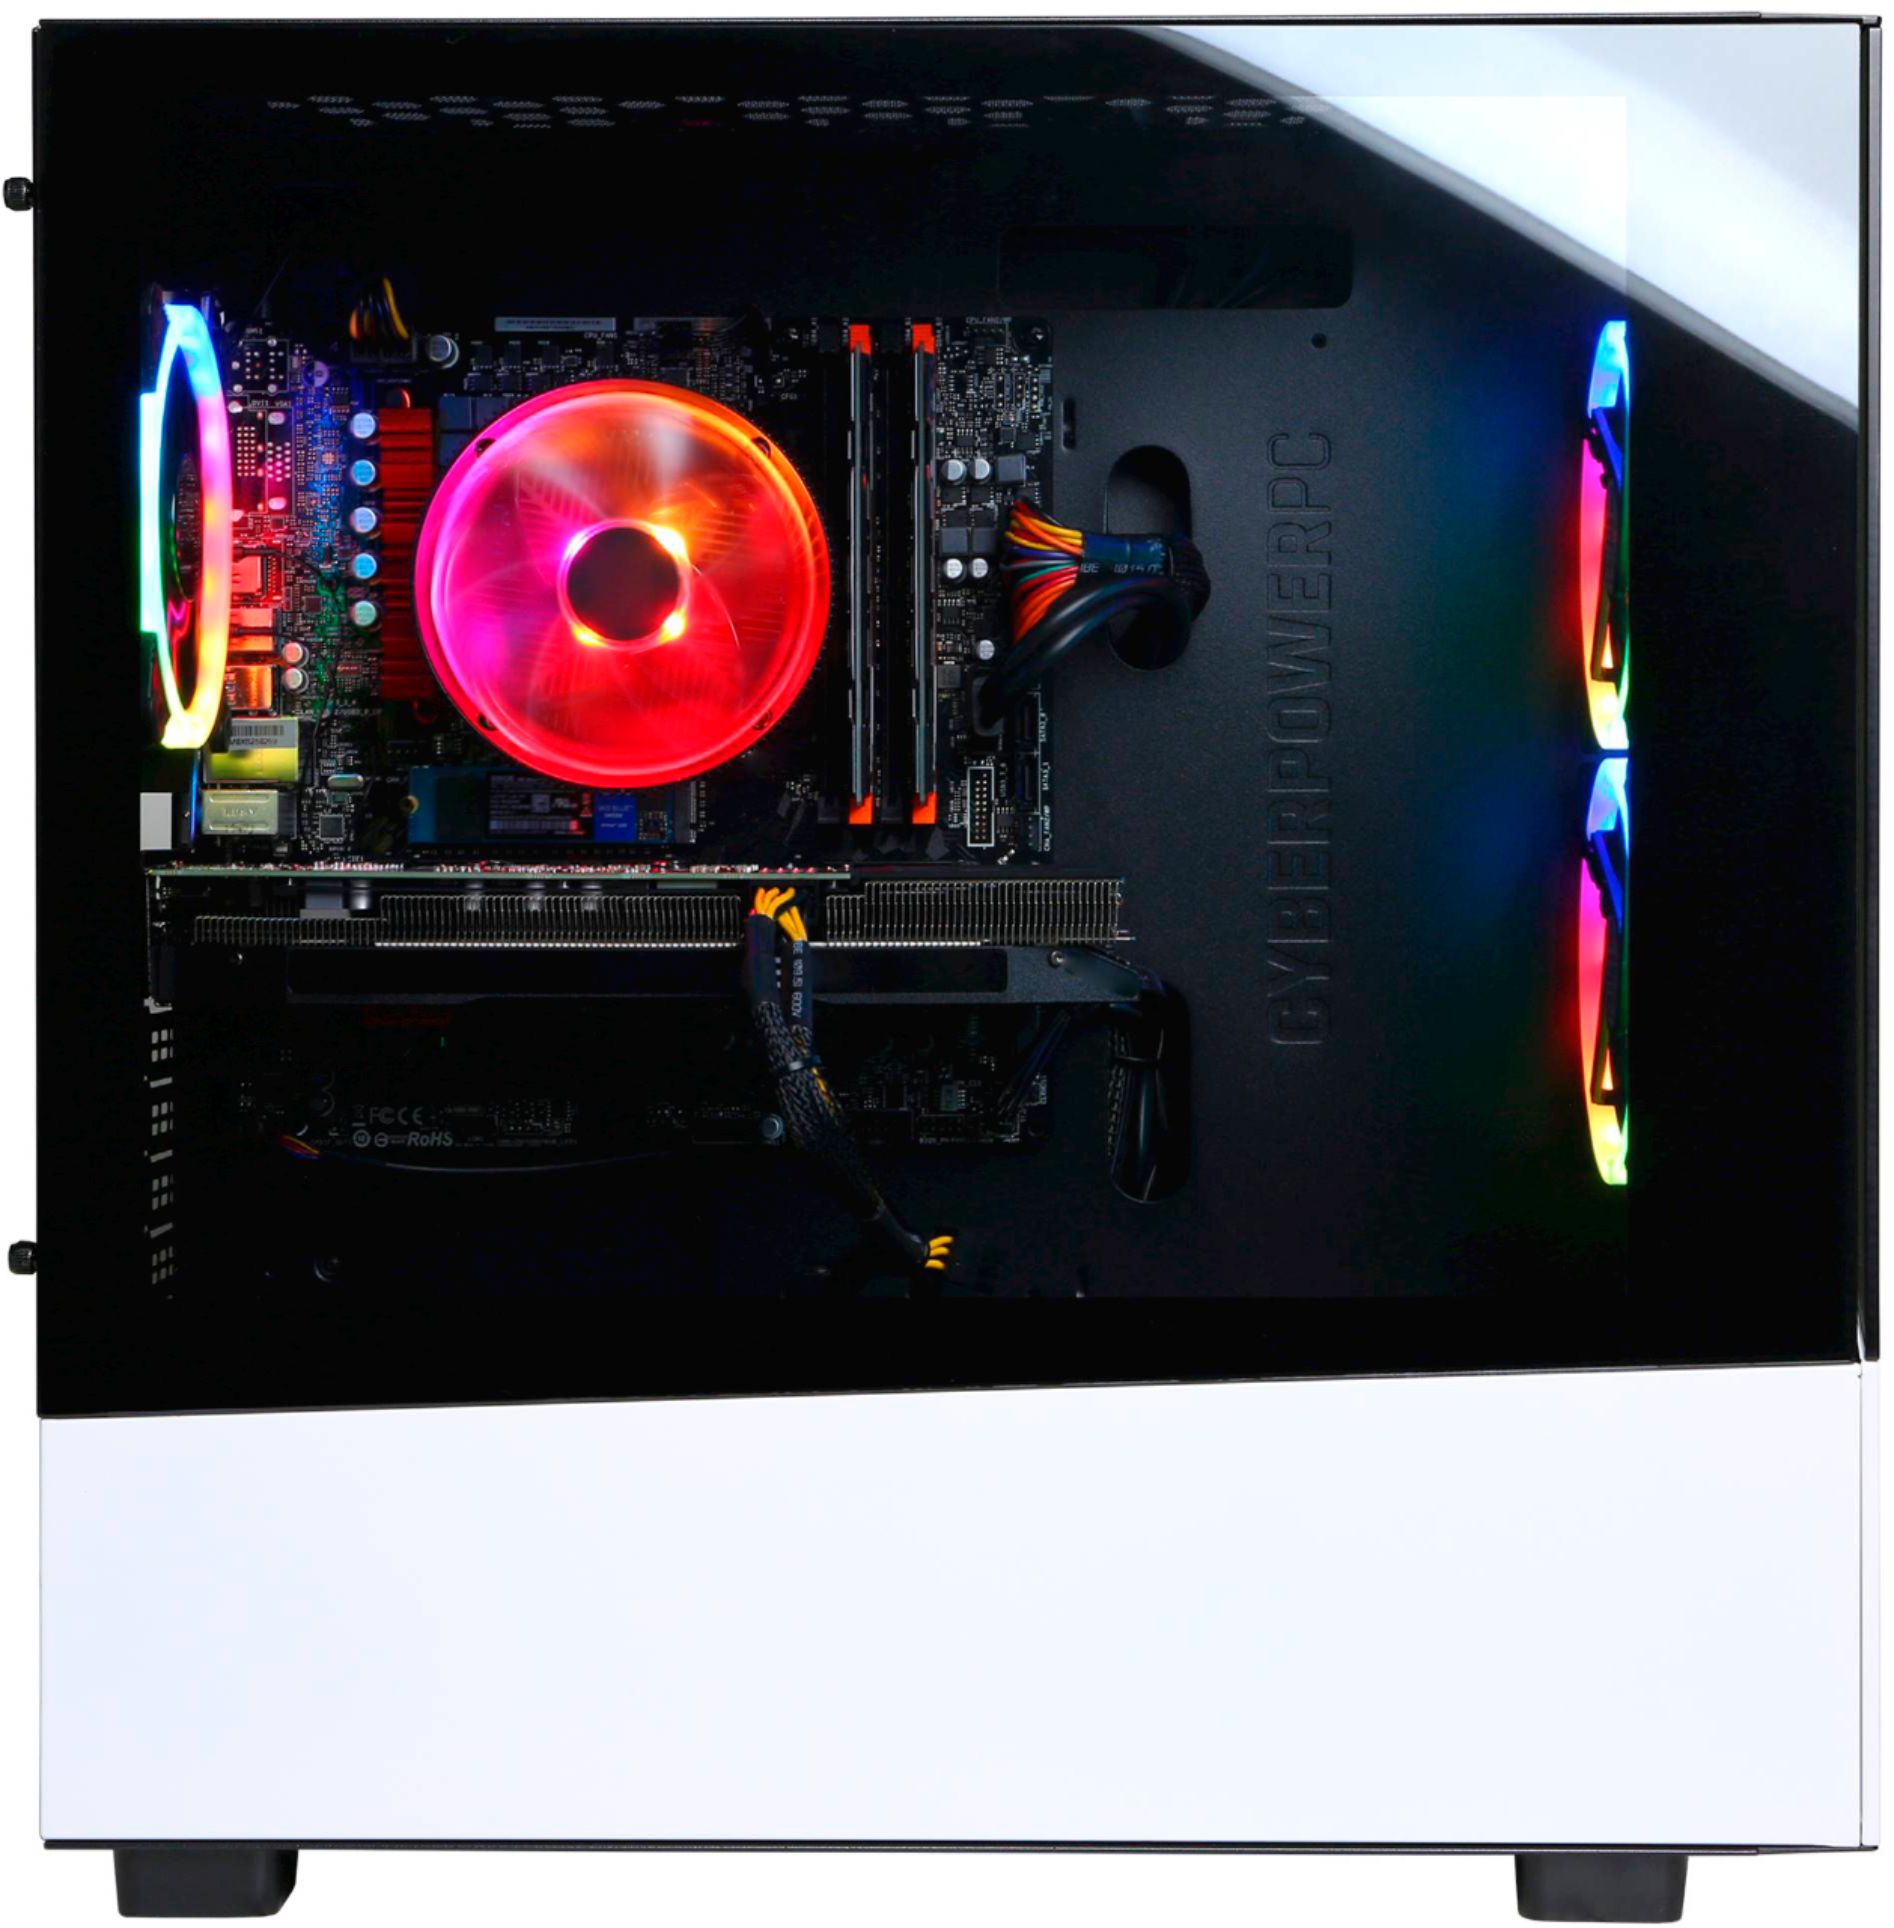 CyberPowerPC GMA4000BST Review: An Affordable Starter Gaming PC